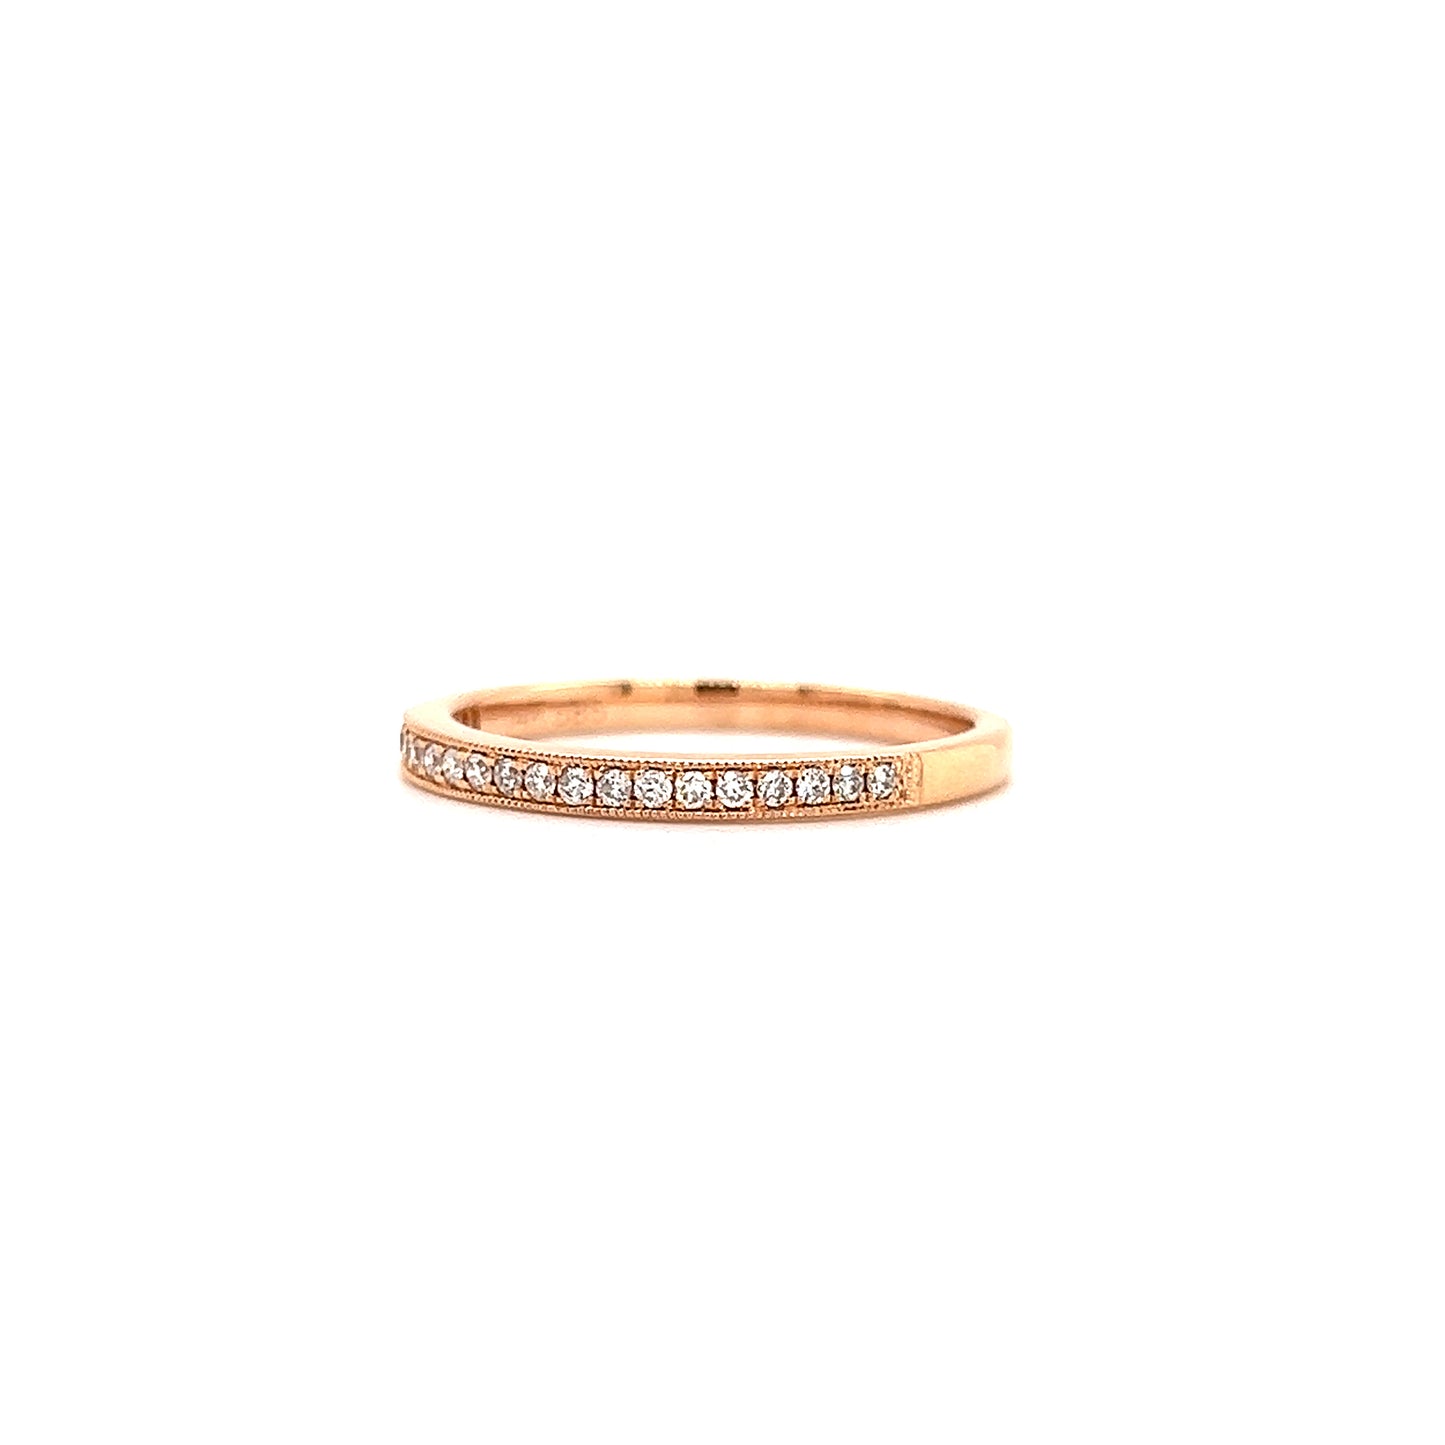 Diamond Ring with Twenty-One Diamonds in 14K Rose Gold Right Side View